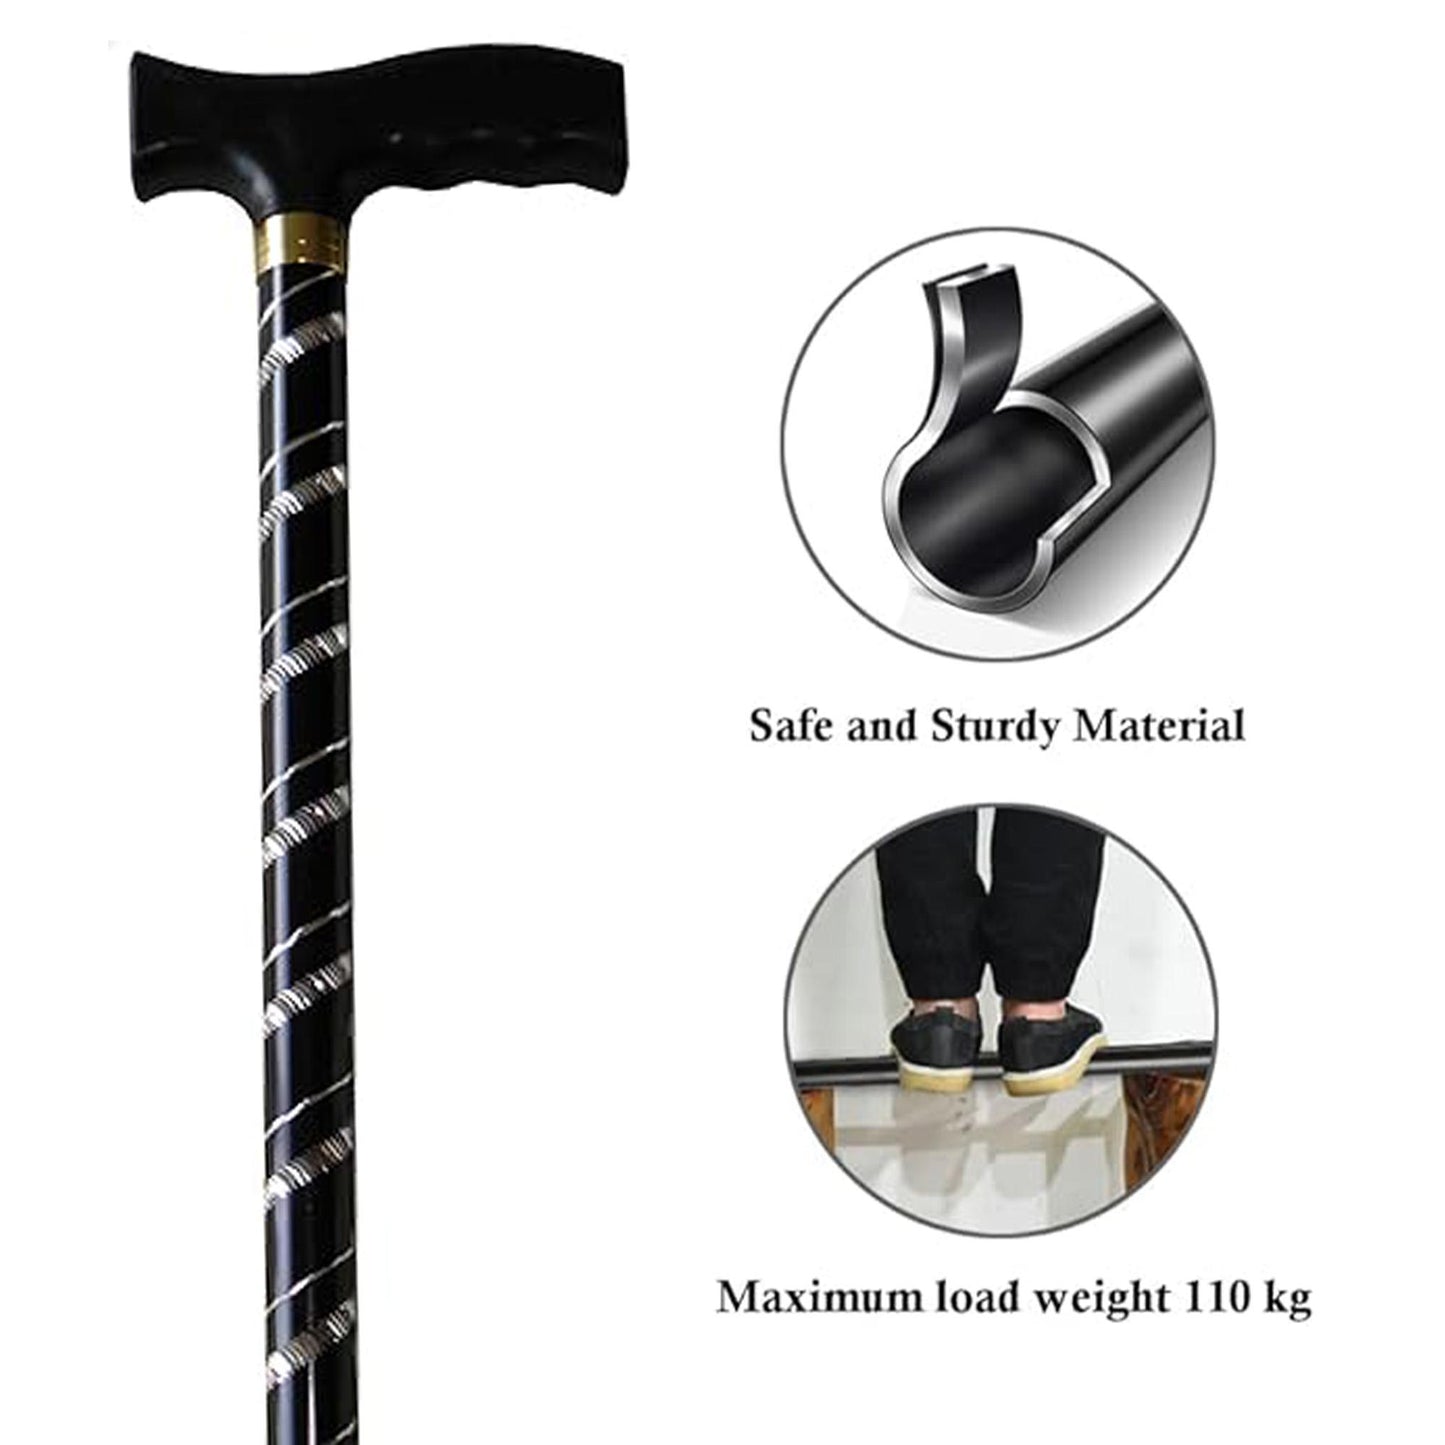 Deluxe Black with Silver Etched Engraved Flecked Stripes Pattern Ladies Adjustable Walking Stick Cane - Lightweight, Easily Adjustable And Retractable